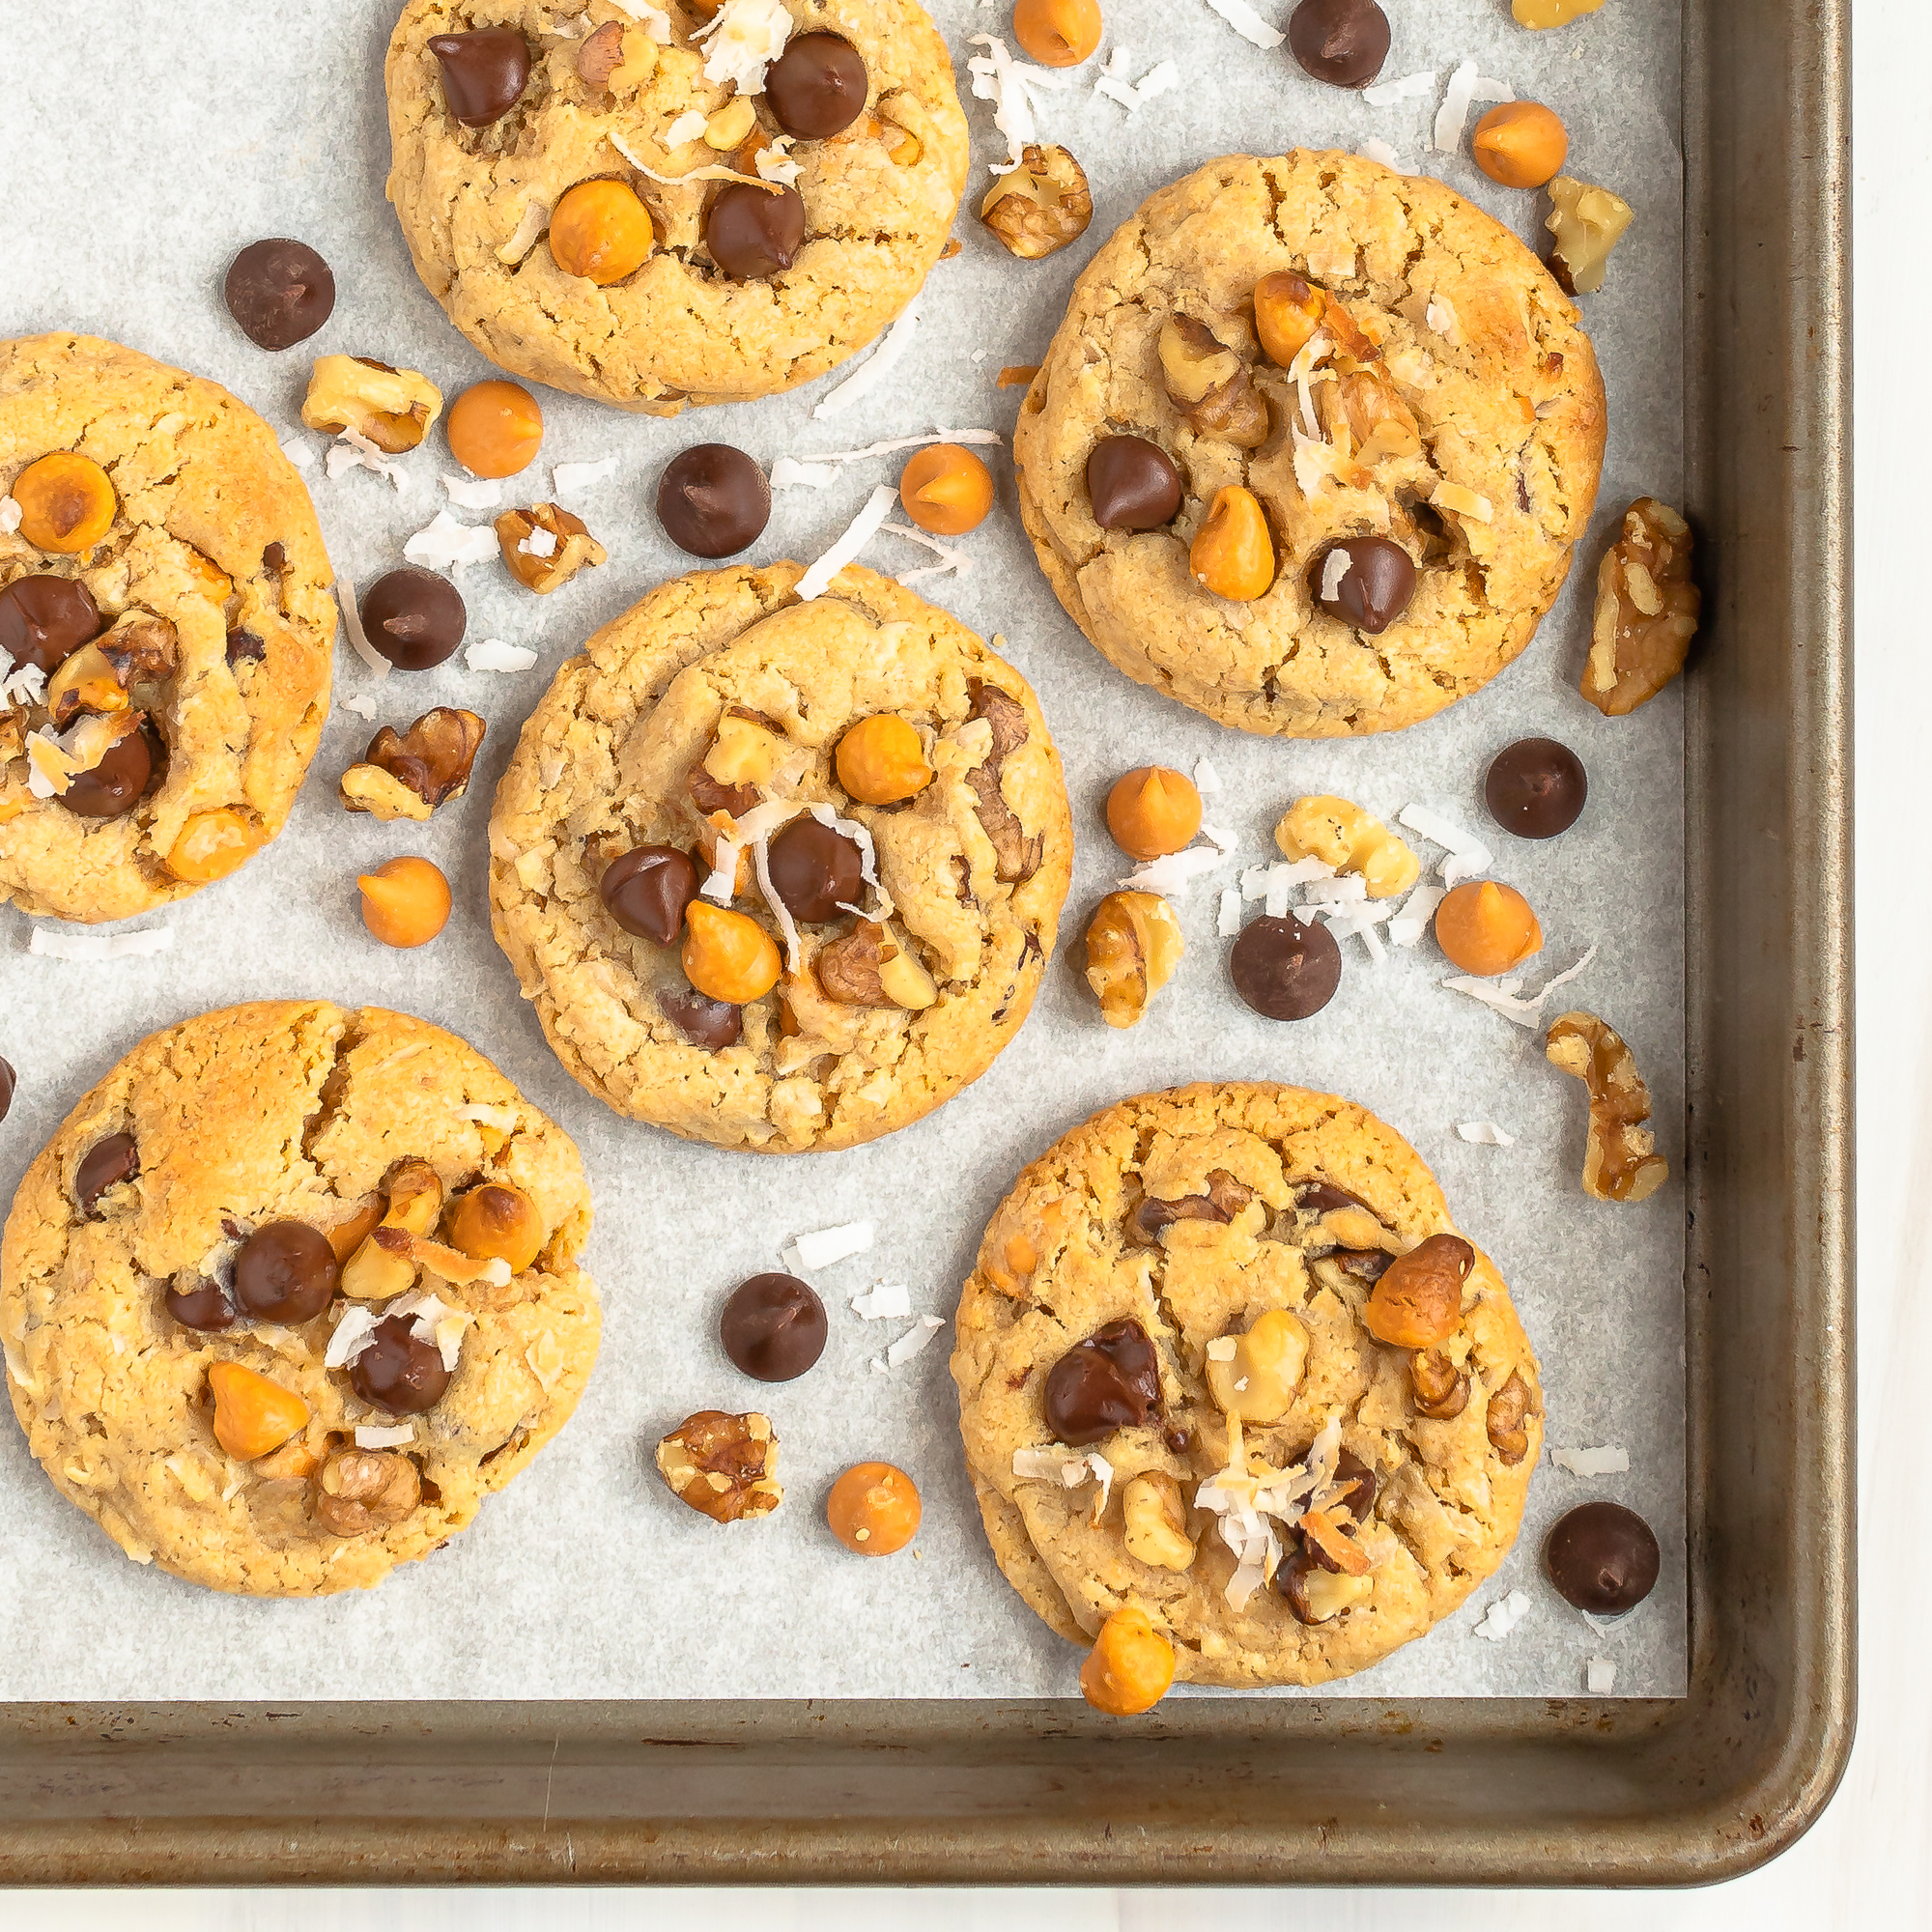 overhead view of magic bar cookies on parchment paper in a baking pan with walnuts, chocolate chips, butterscotch chips and coconut in between the cookies for decoration